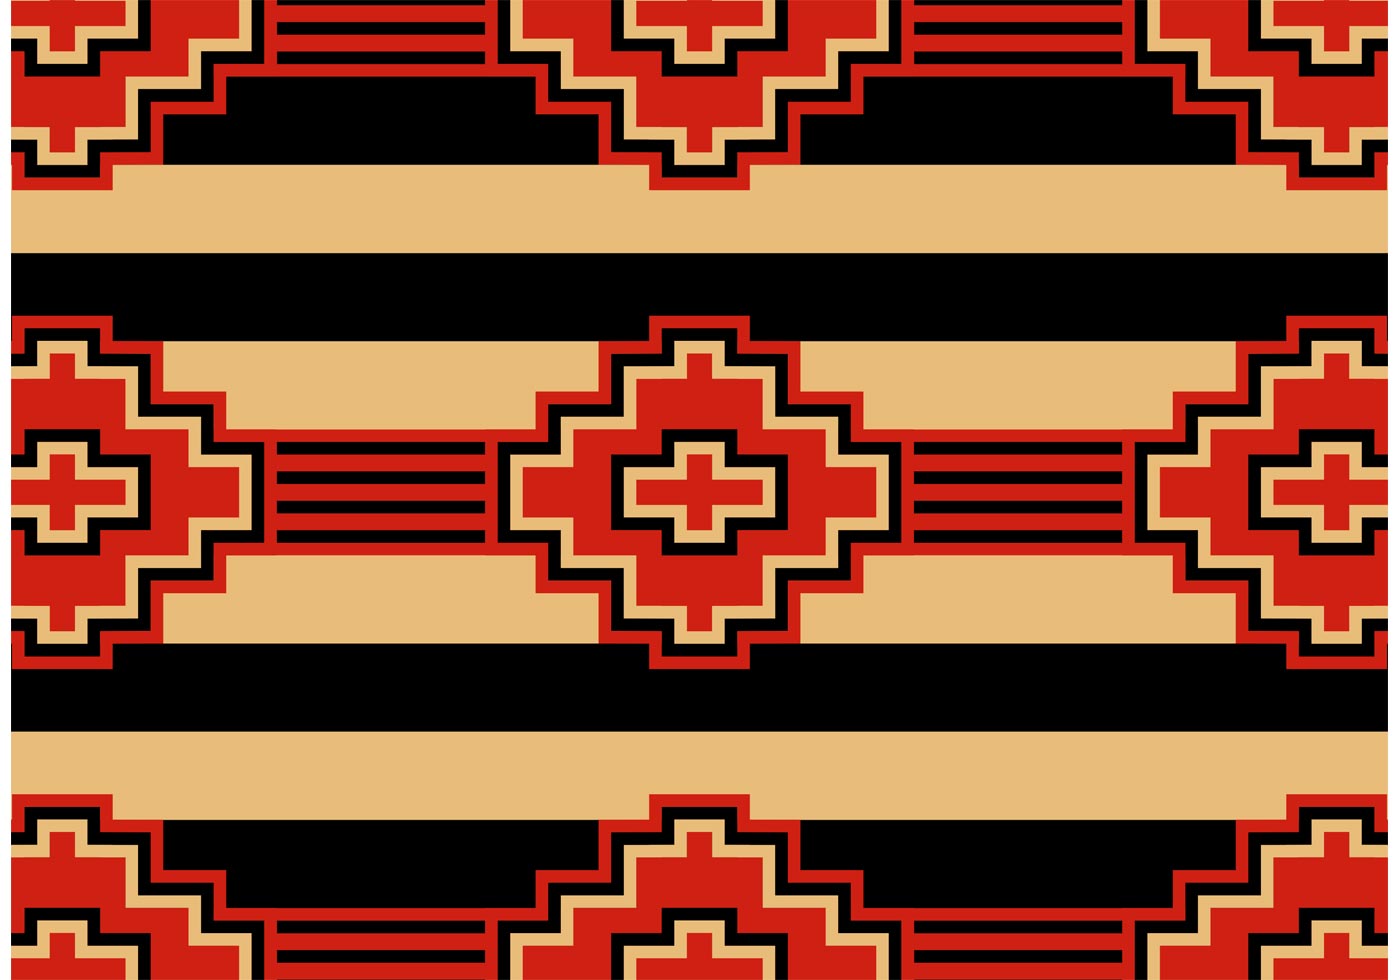 Native American Pattern Free Vector - Download Free Vector Art, Stock